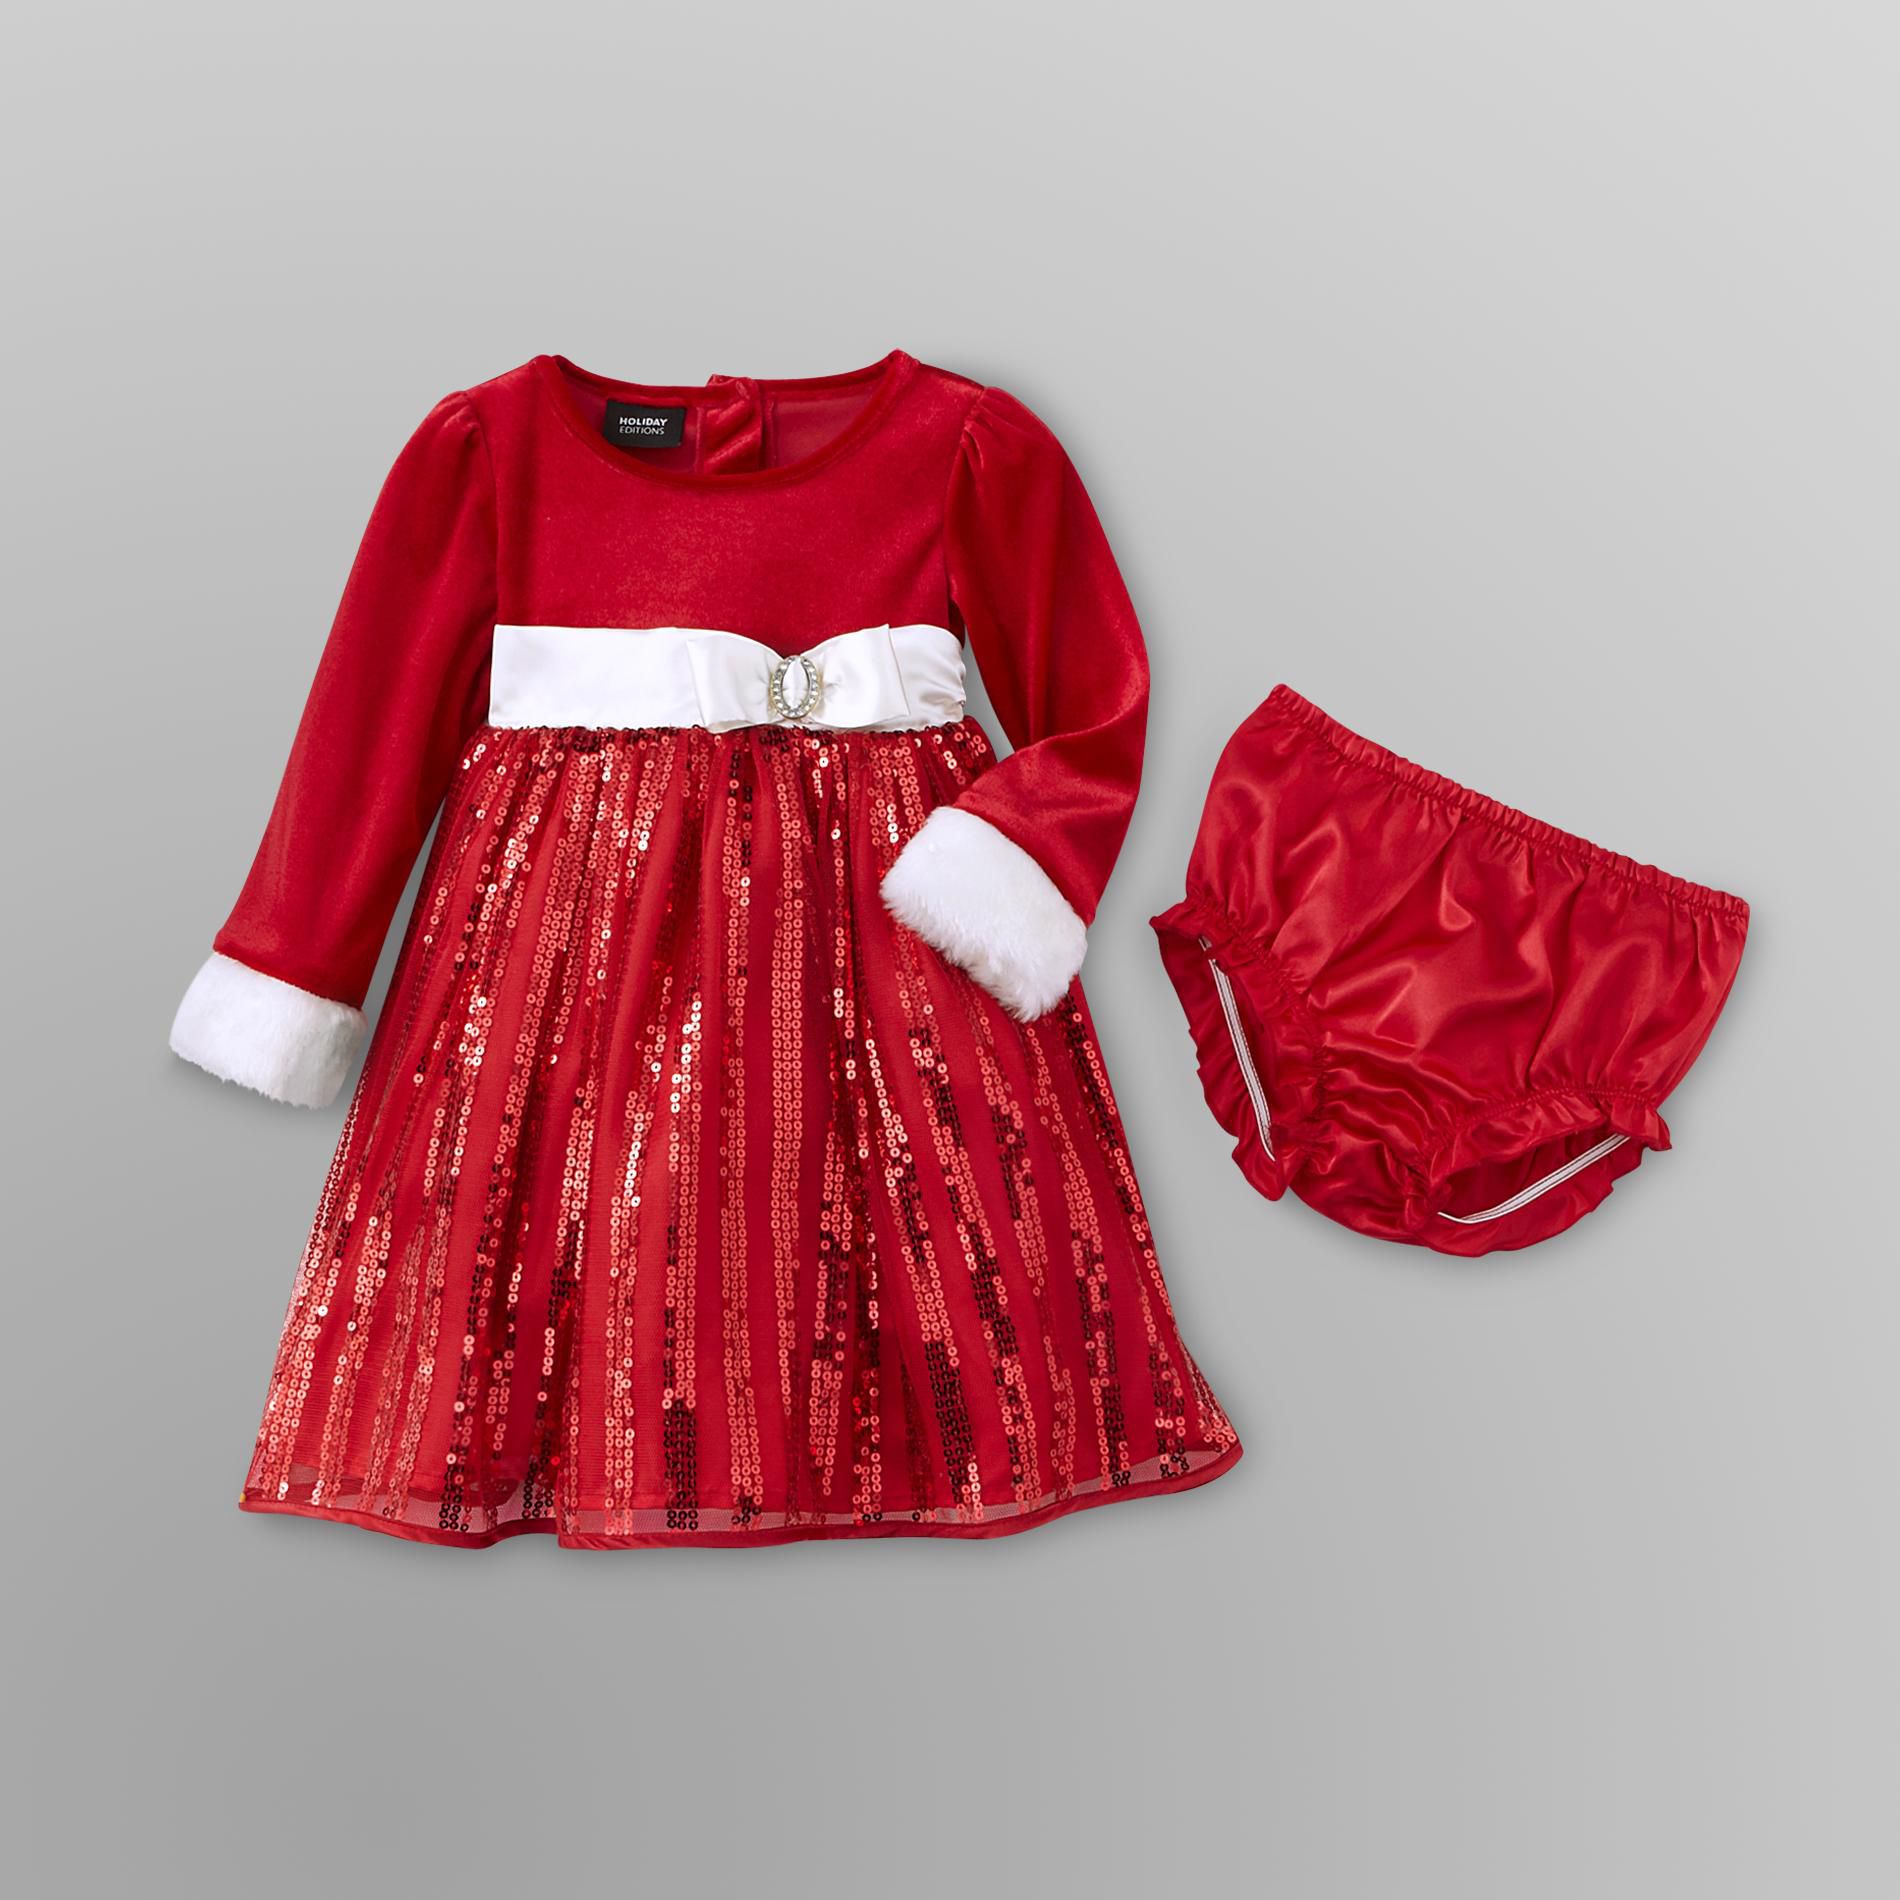 Holiday Editions Infant & Toddler Girl's Velour Dress - Faux Fur & Sequin